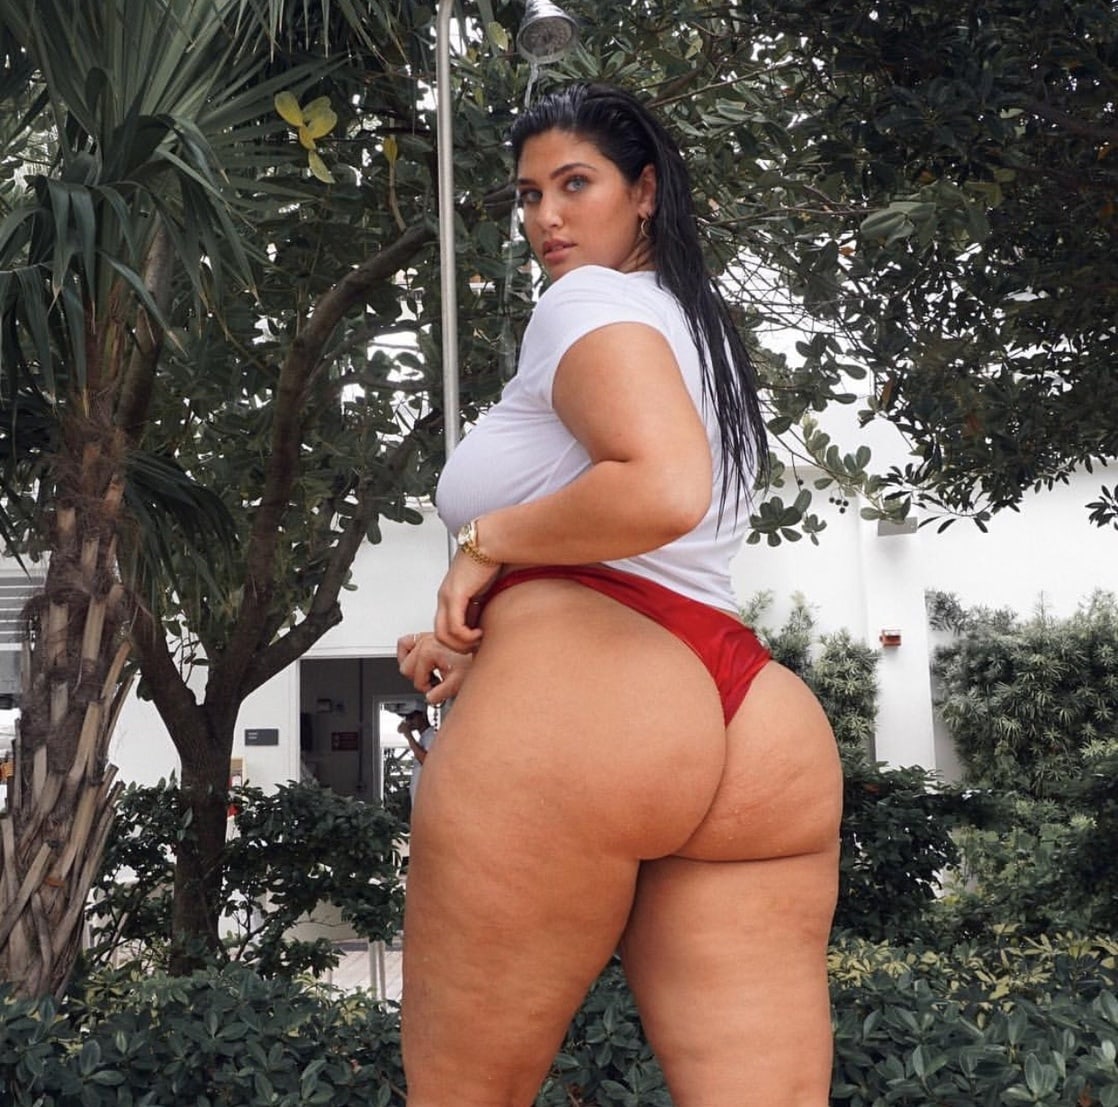 La’Tecia Thomas sex tape and nudes photos leaks online from her onlyfans, p...